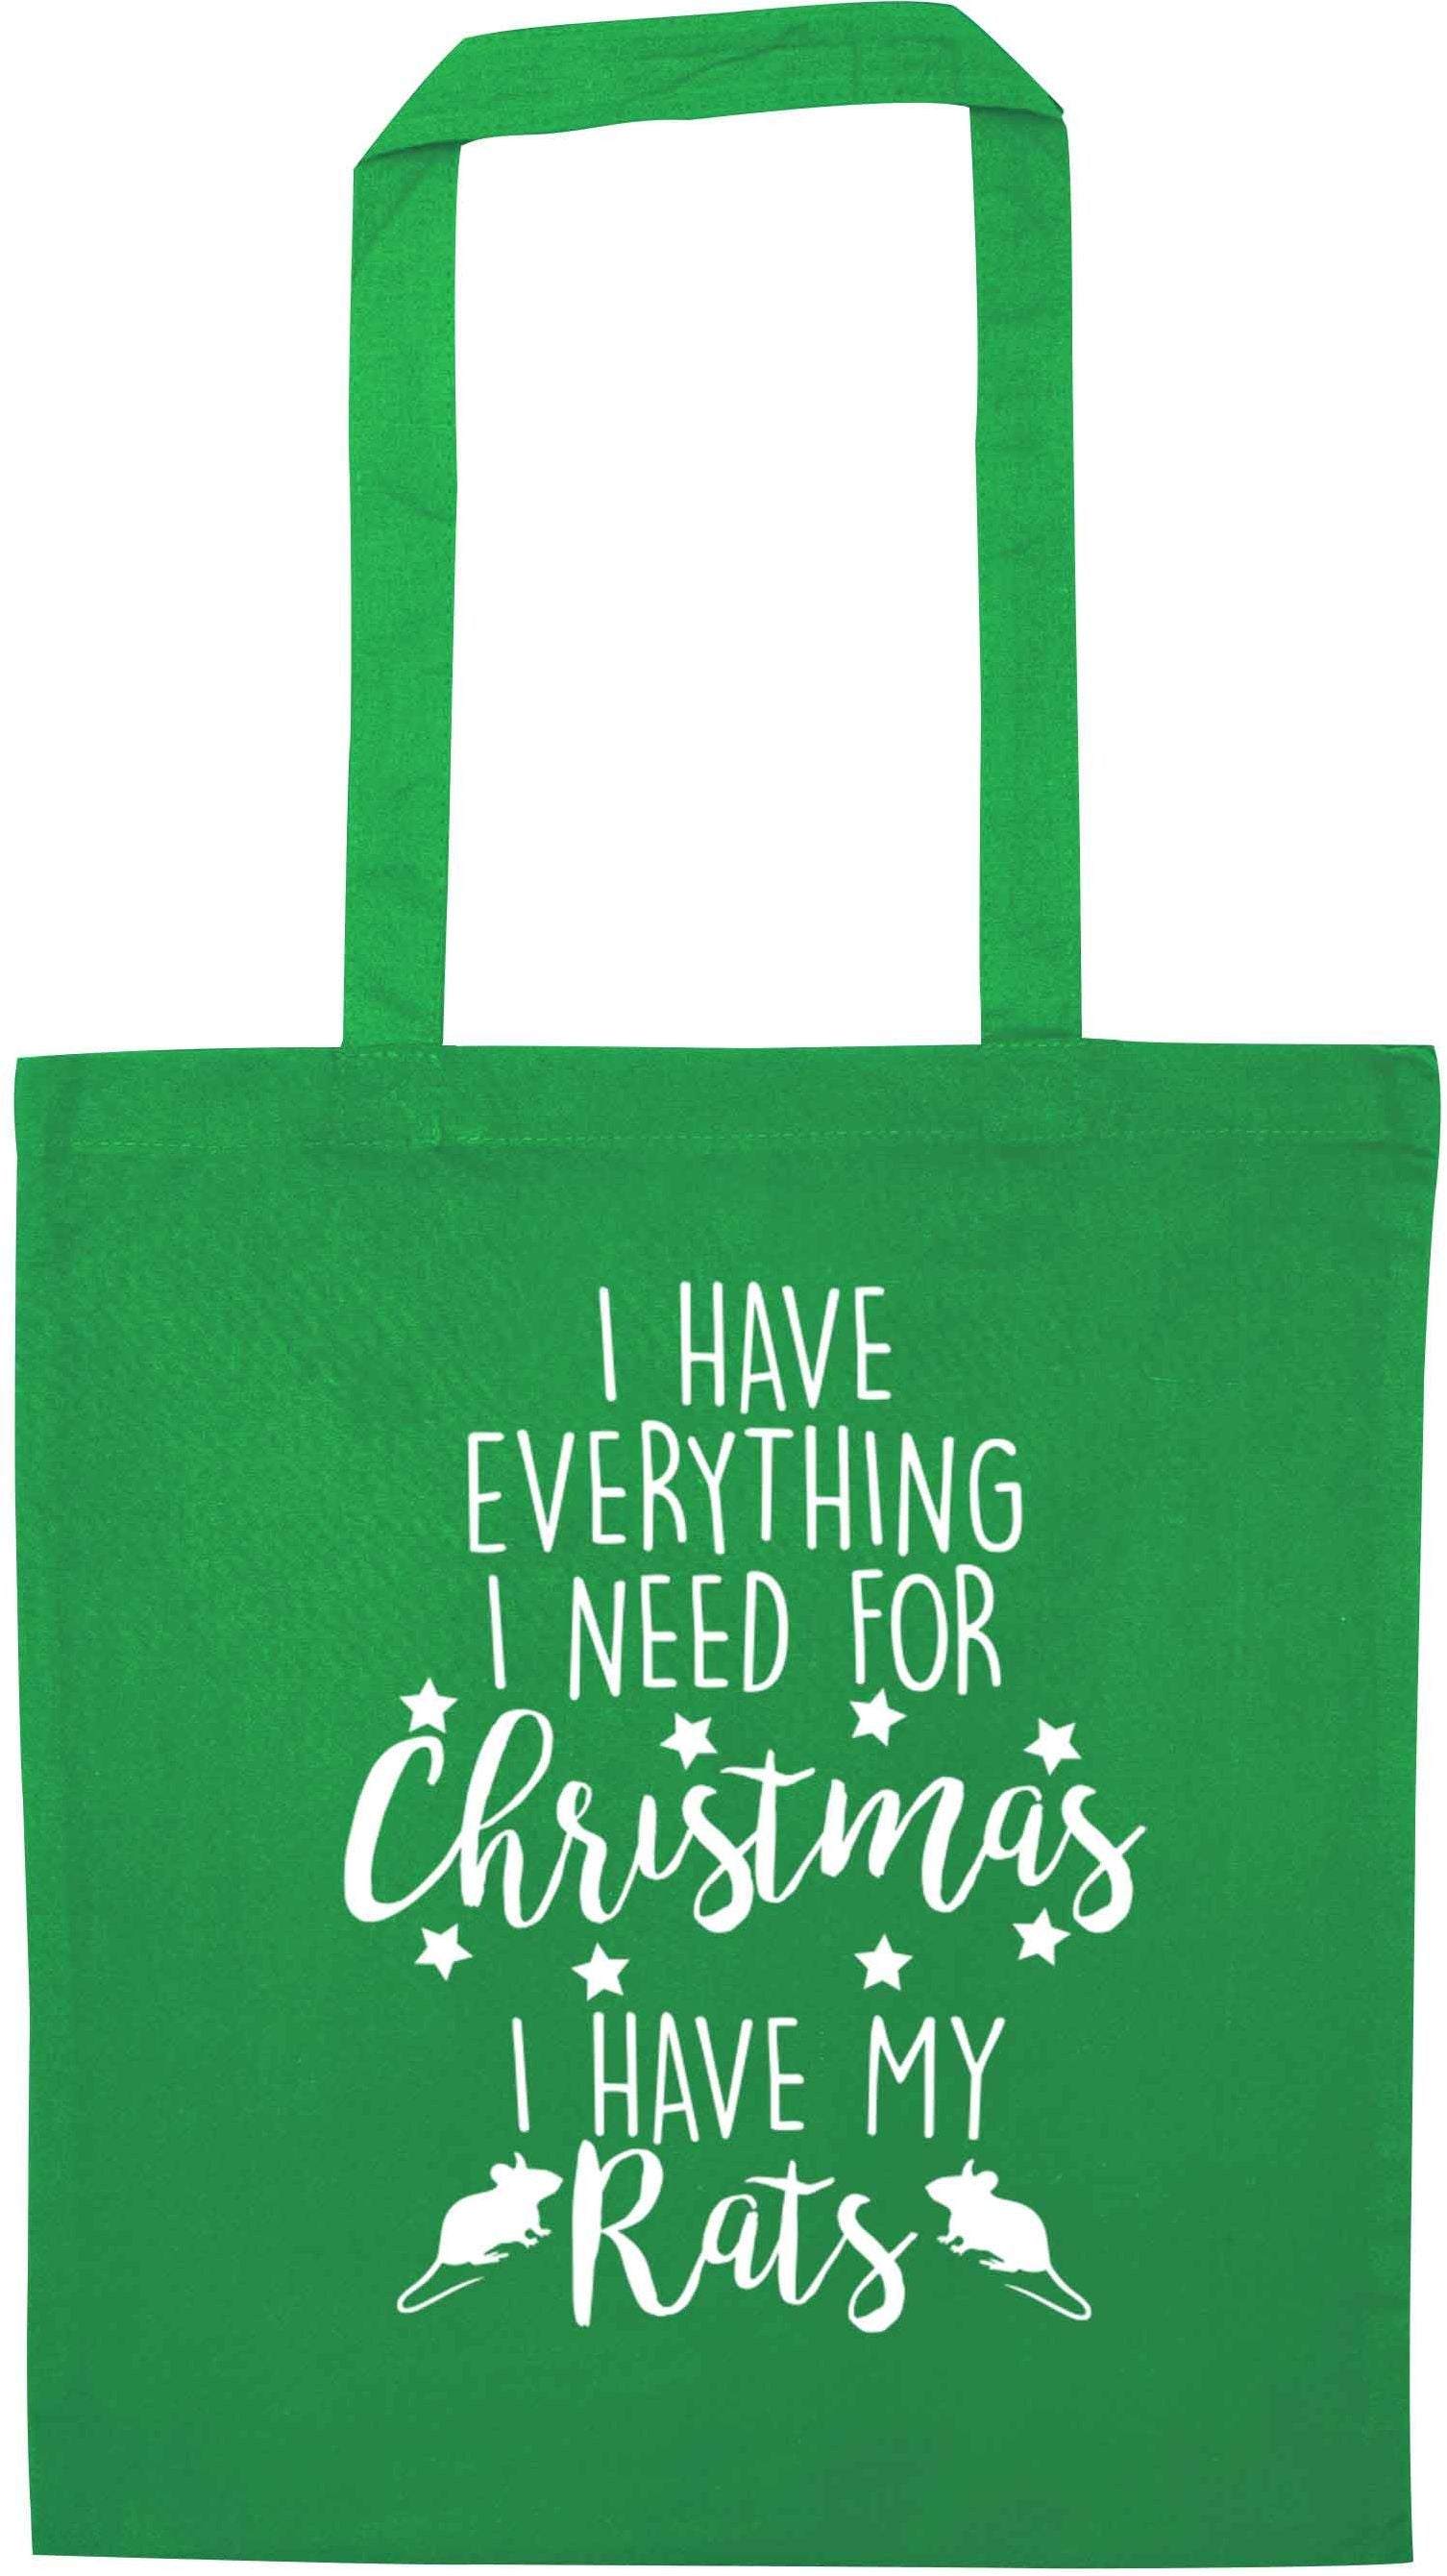 I have everything I need for Christmas I have my rats green tote bag